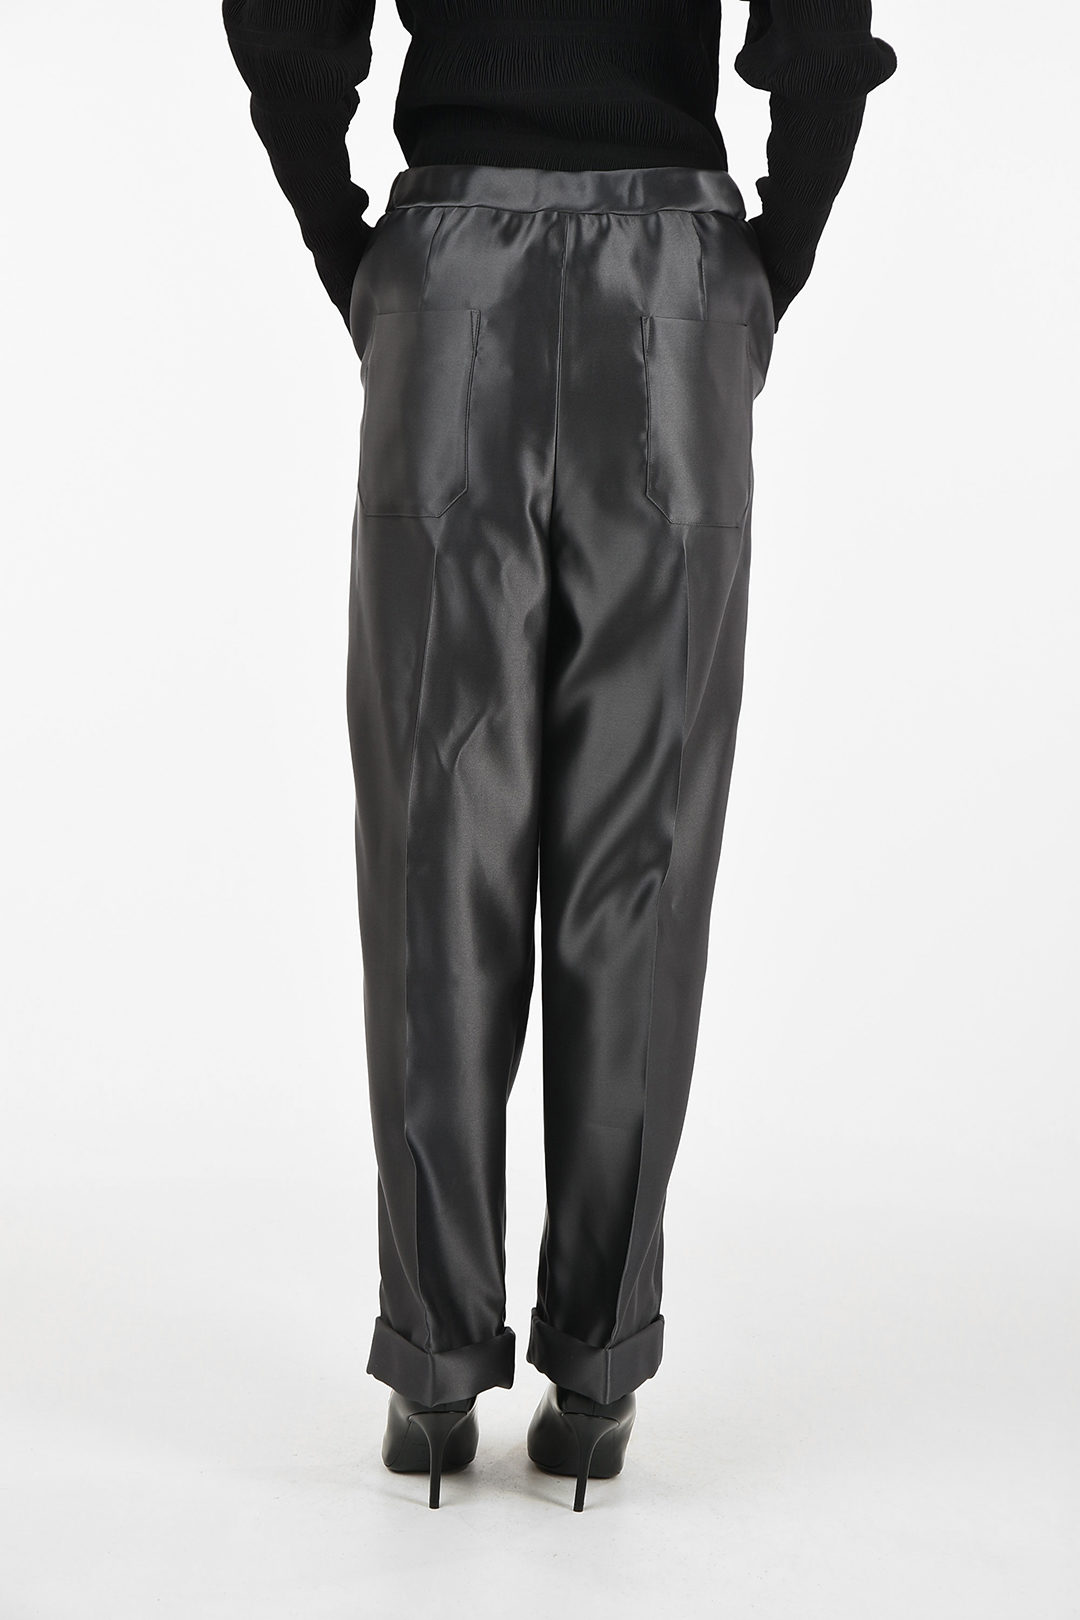 Tom Ford silk palazzo pants women - Glamood Outlet